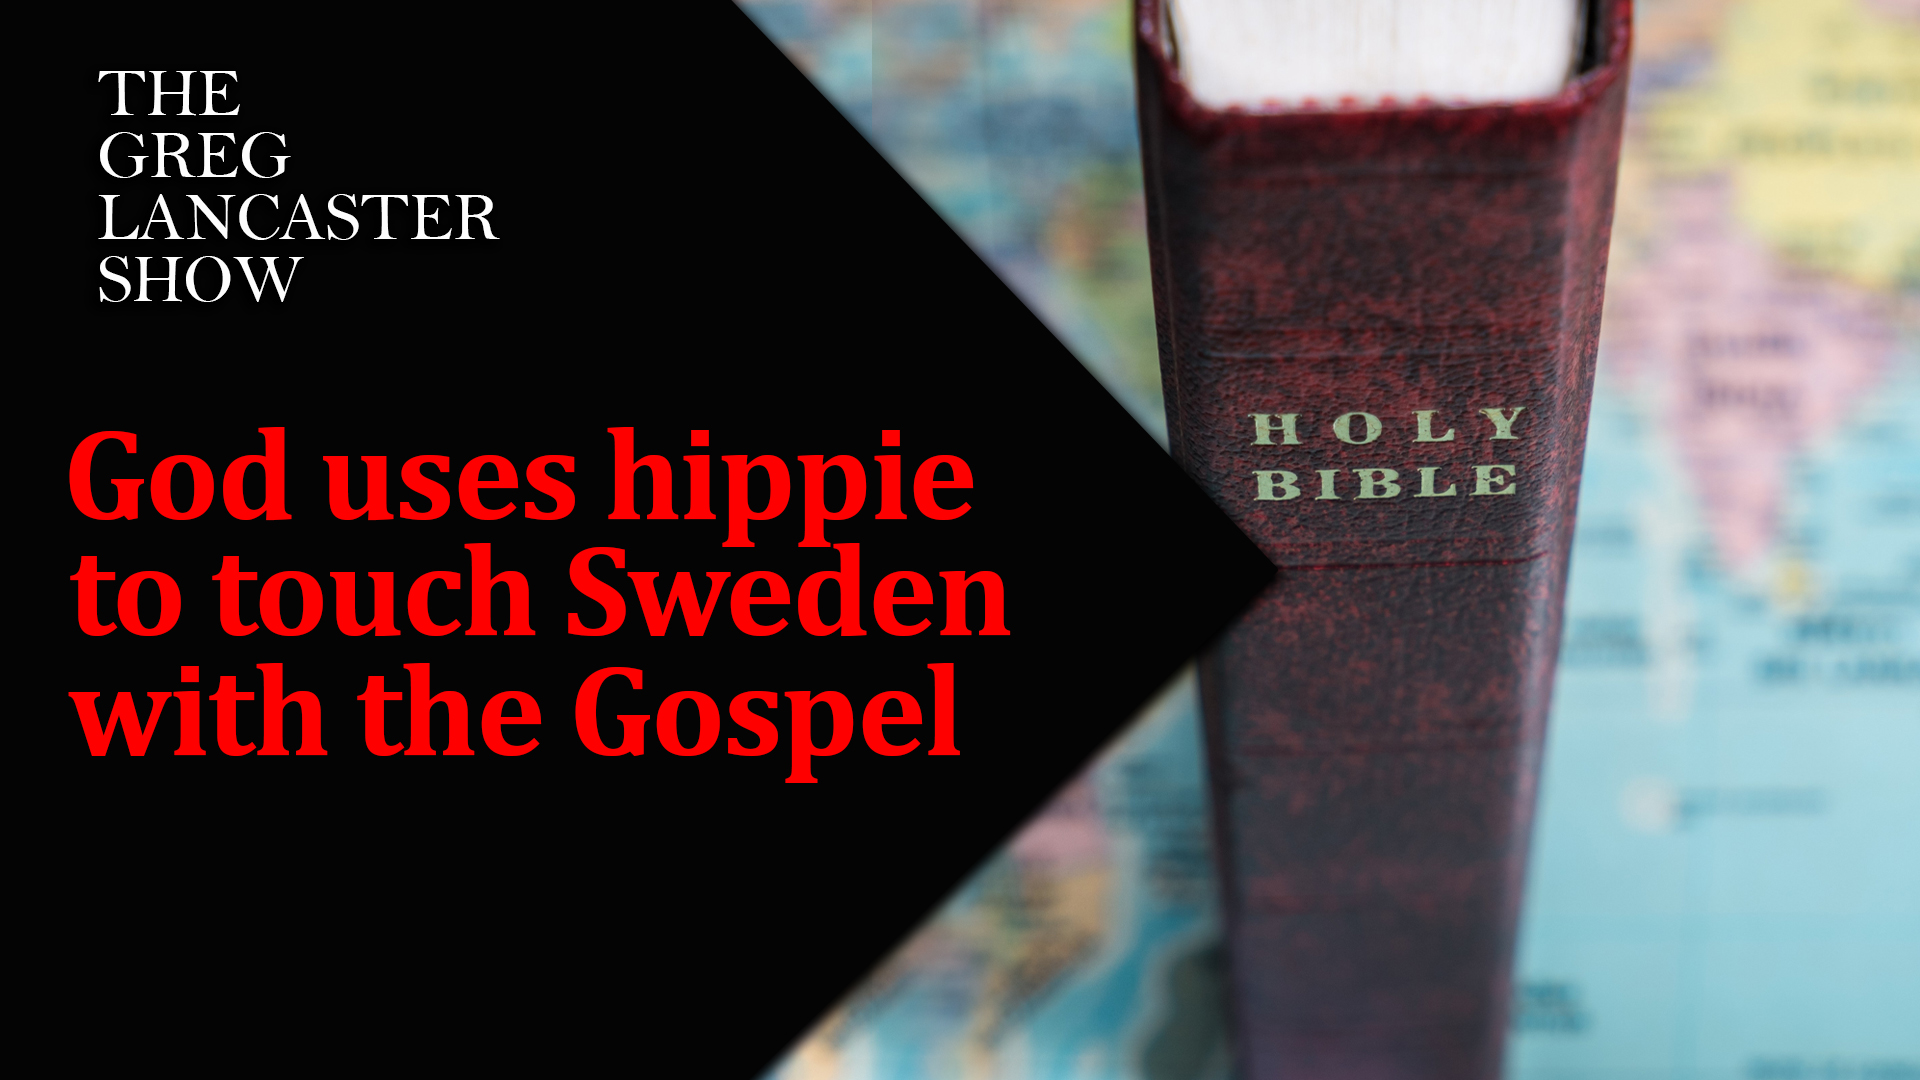 10-26-21 God uses hippie to touch Sweden with the Gospel